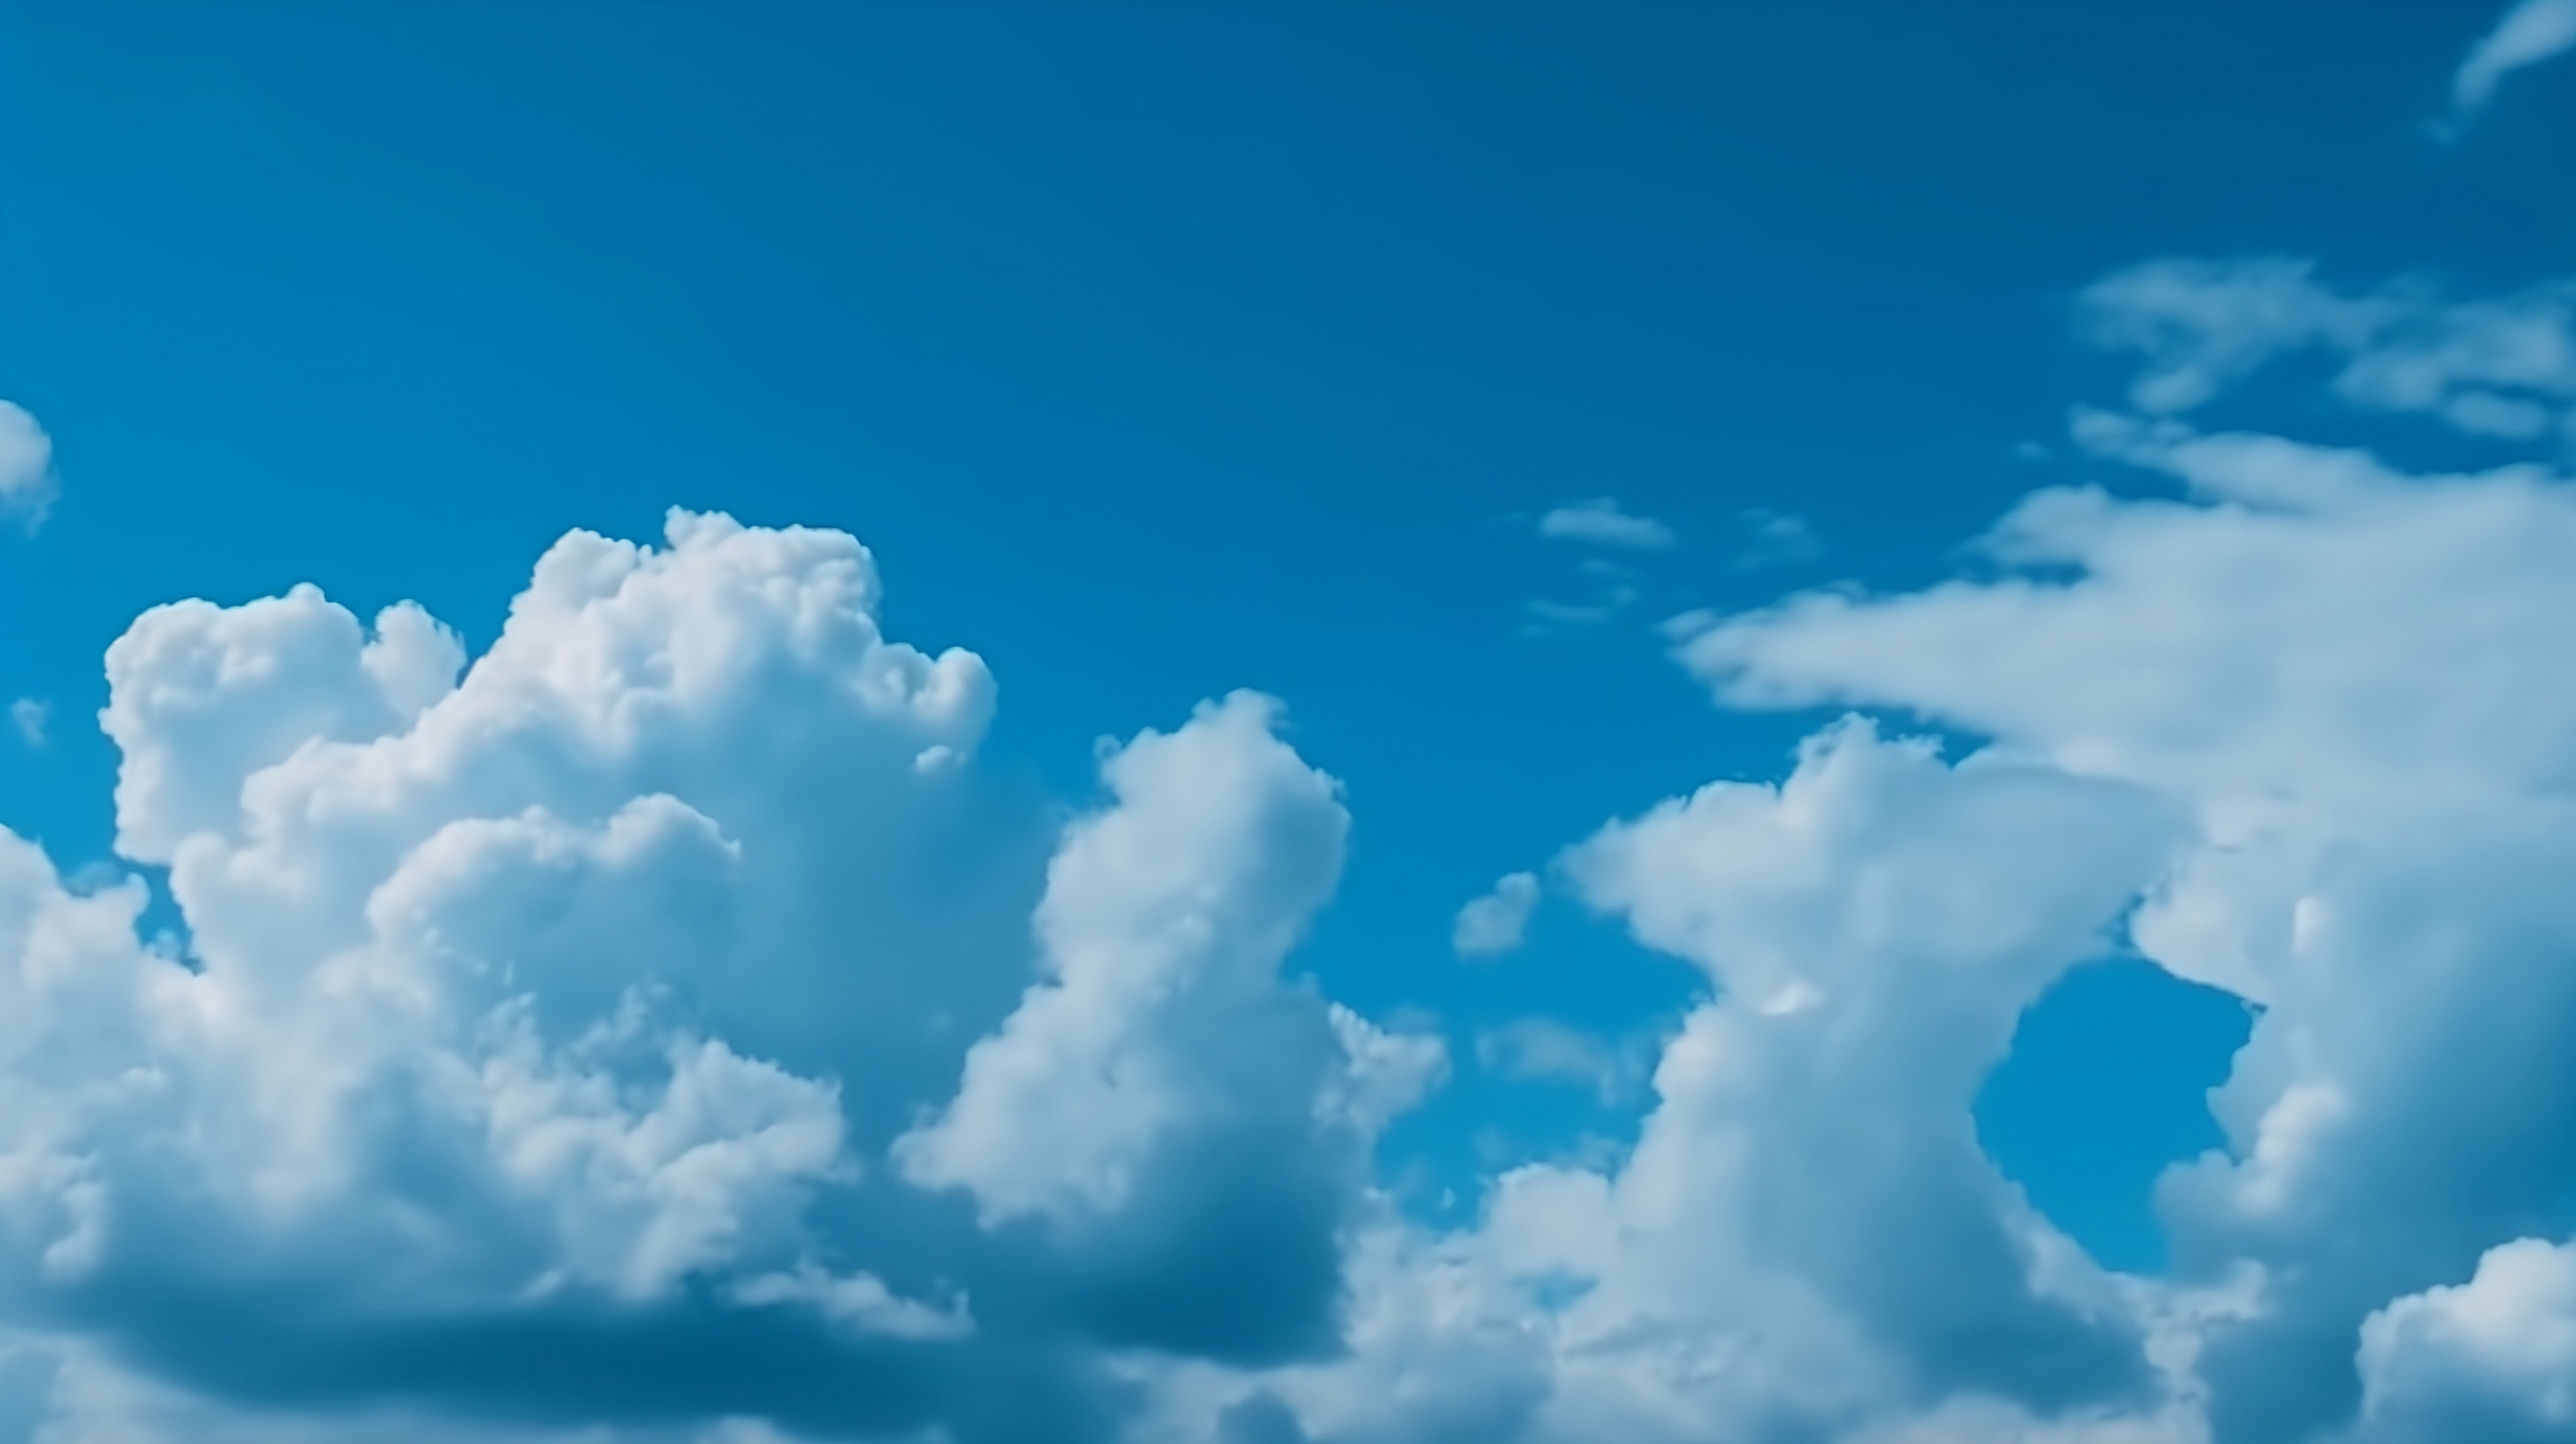 A beautiful blue sky with fluffy white clouds floating in the background